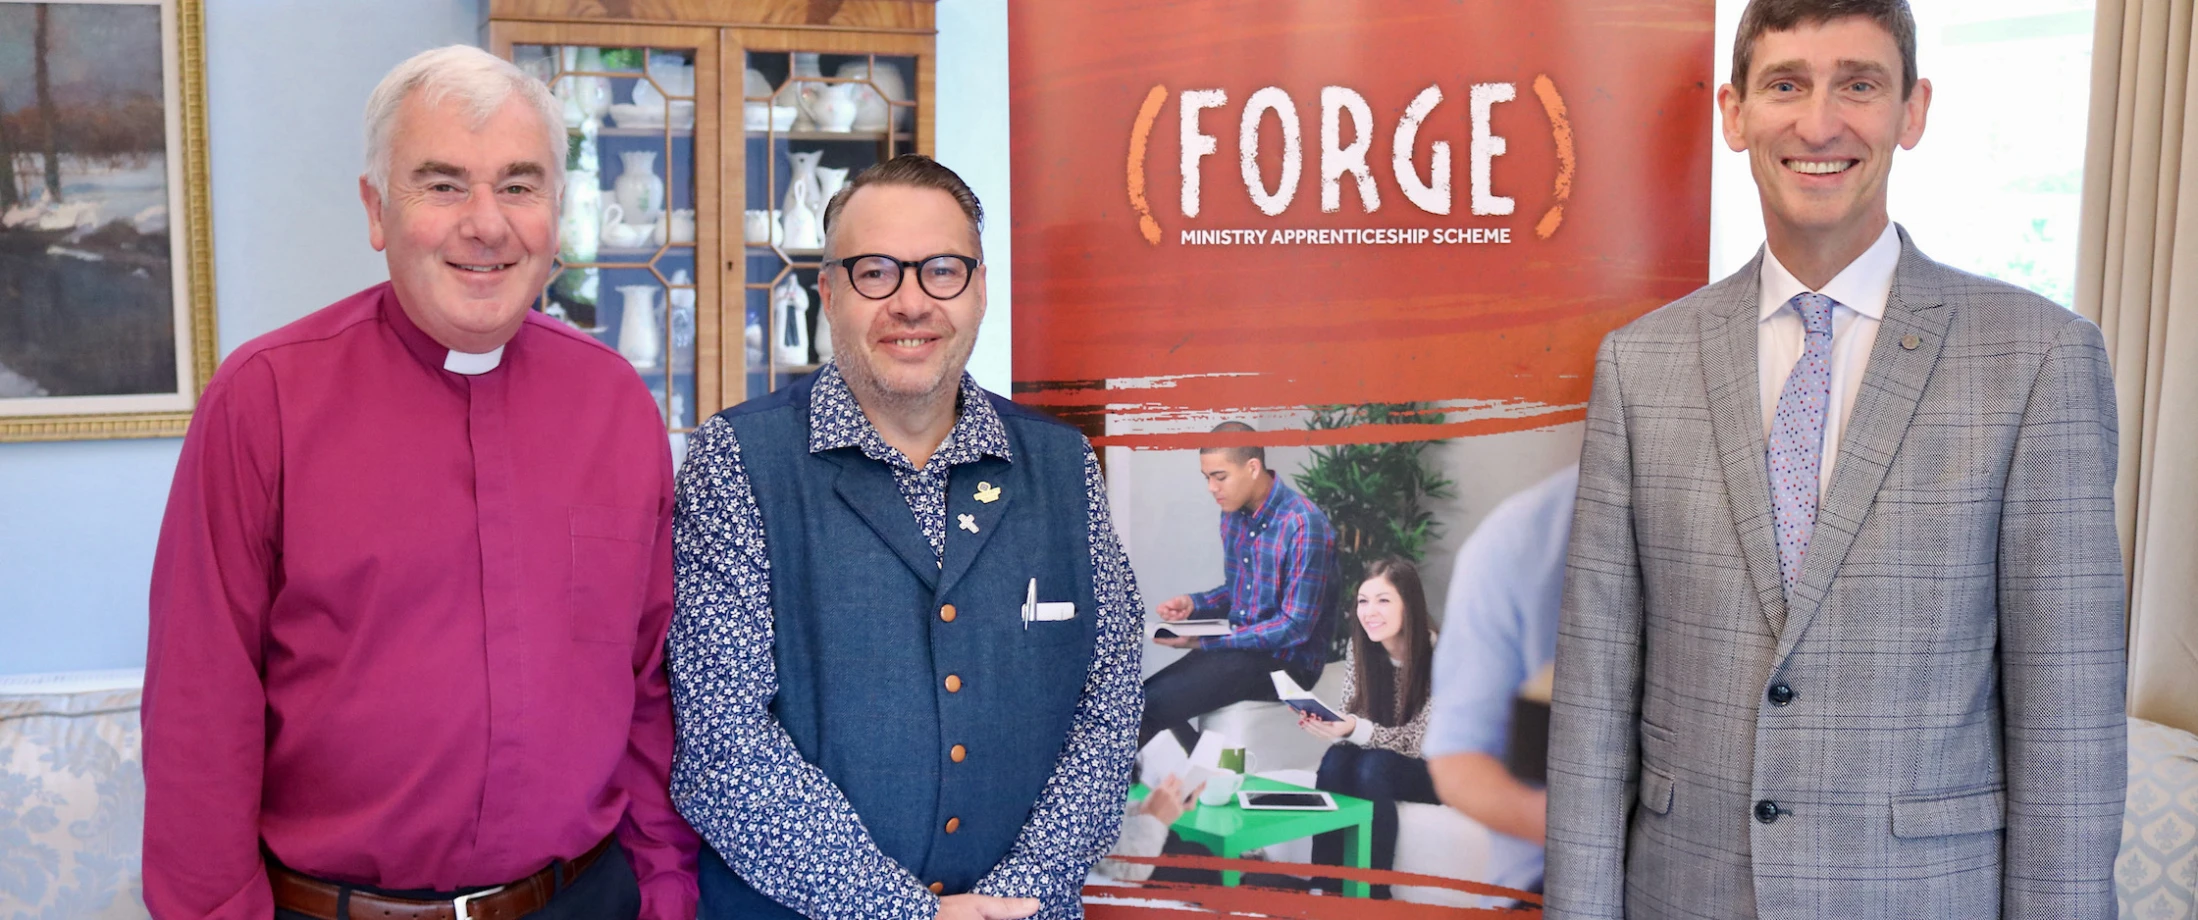 FORGE funder visits the diocese